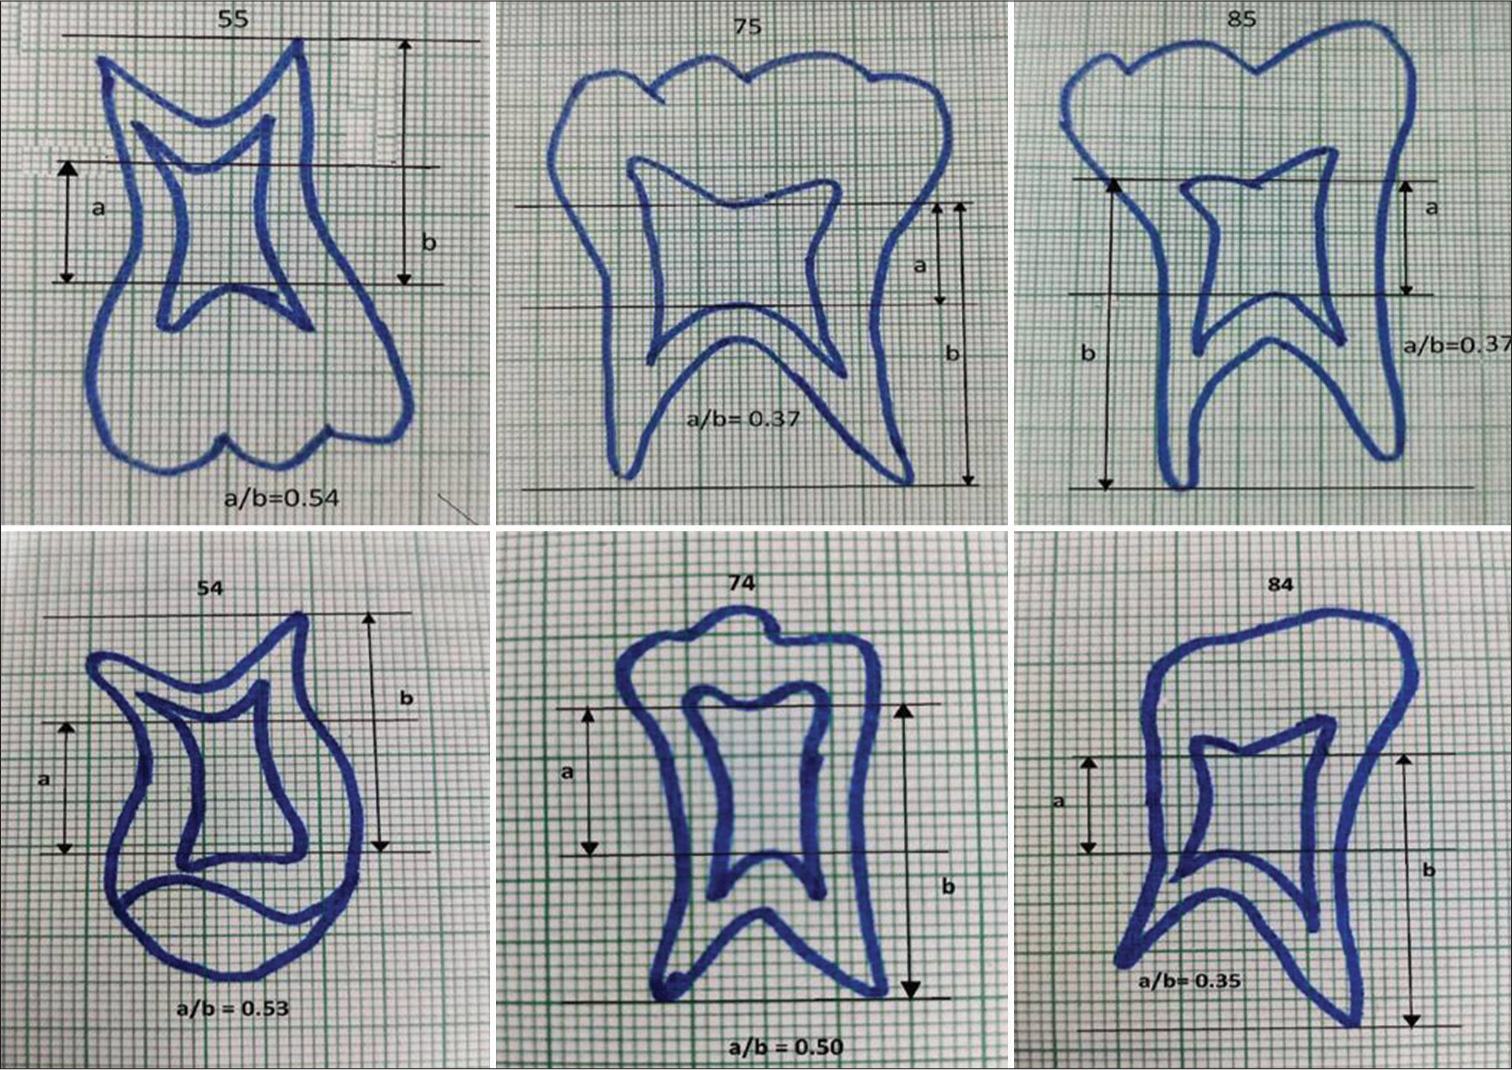 Tracing of the intraoral periapical radiograph showing 74, 75, 84, 85, 54 and 55 confirming the taurodontic tooth according to Shifman and Chanannel criteria.[5]